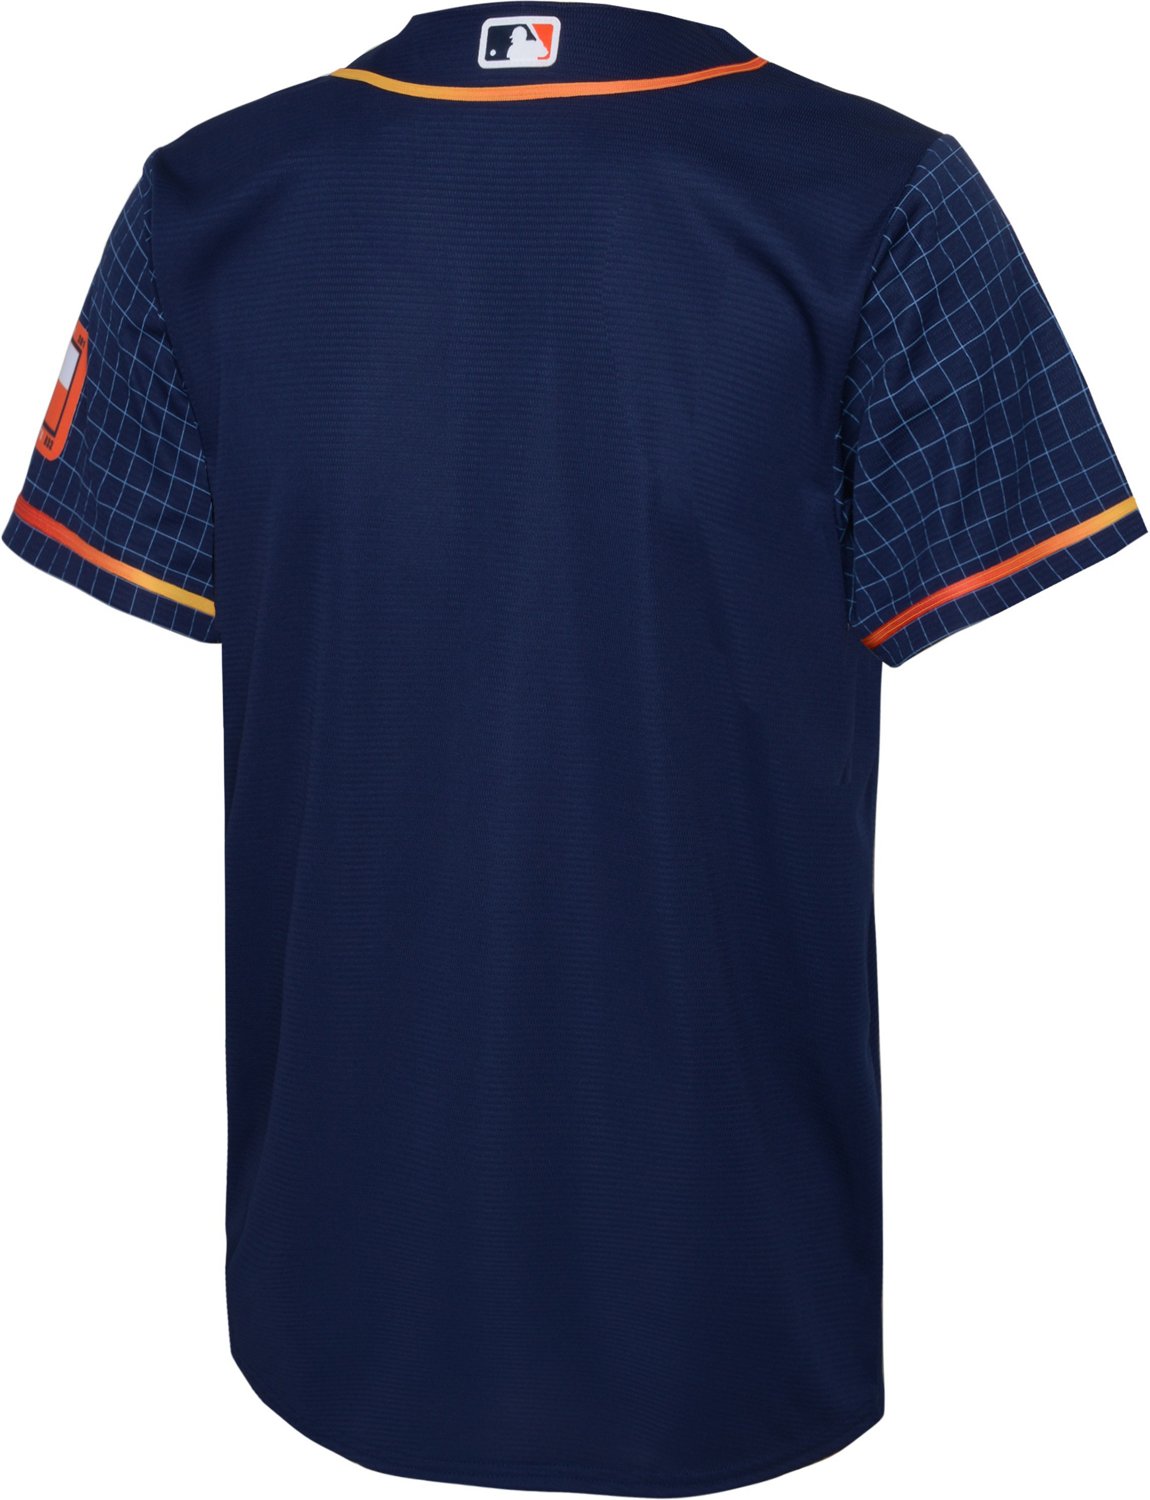 space city astros jersey academy